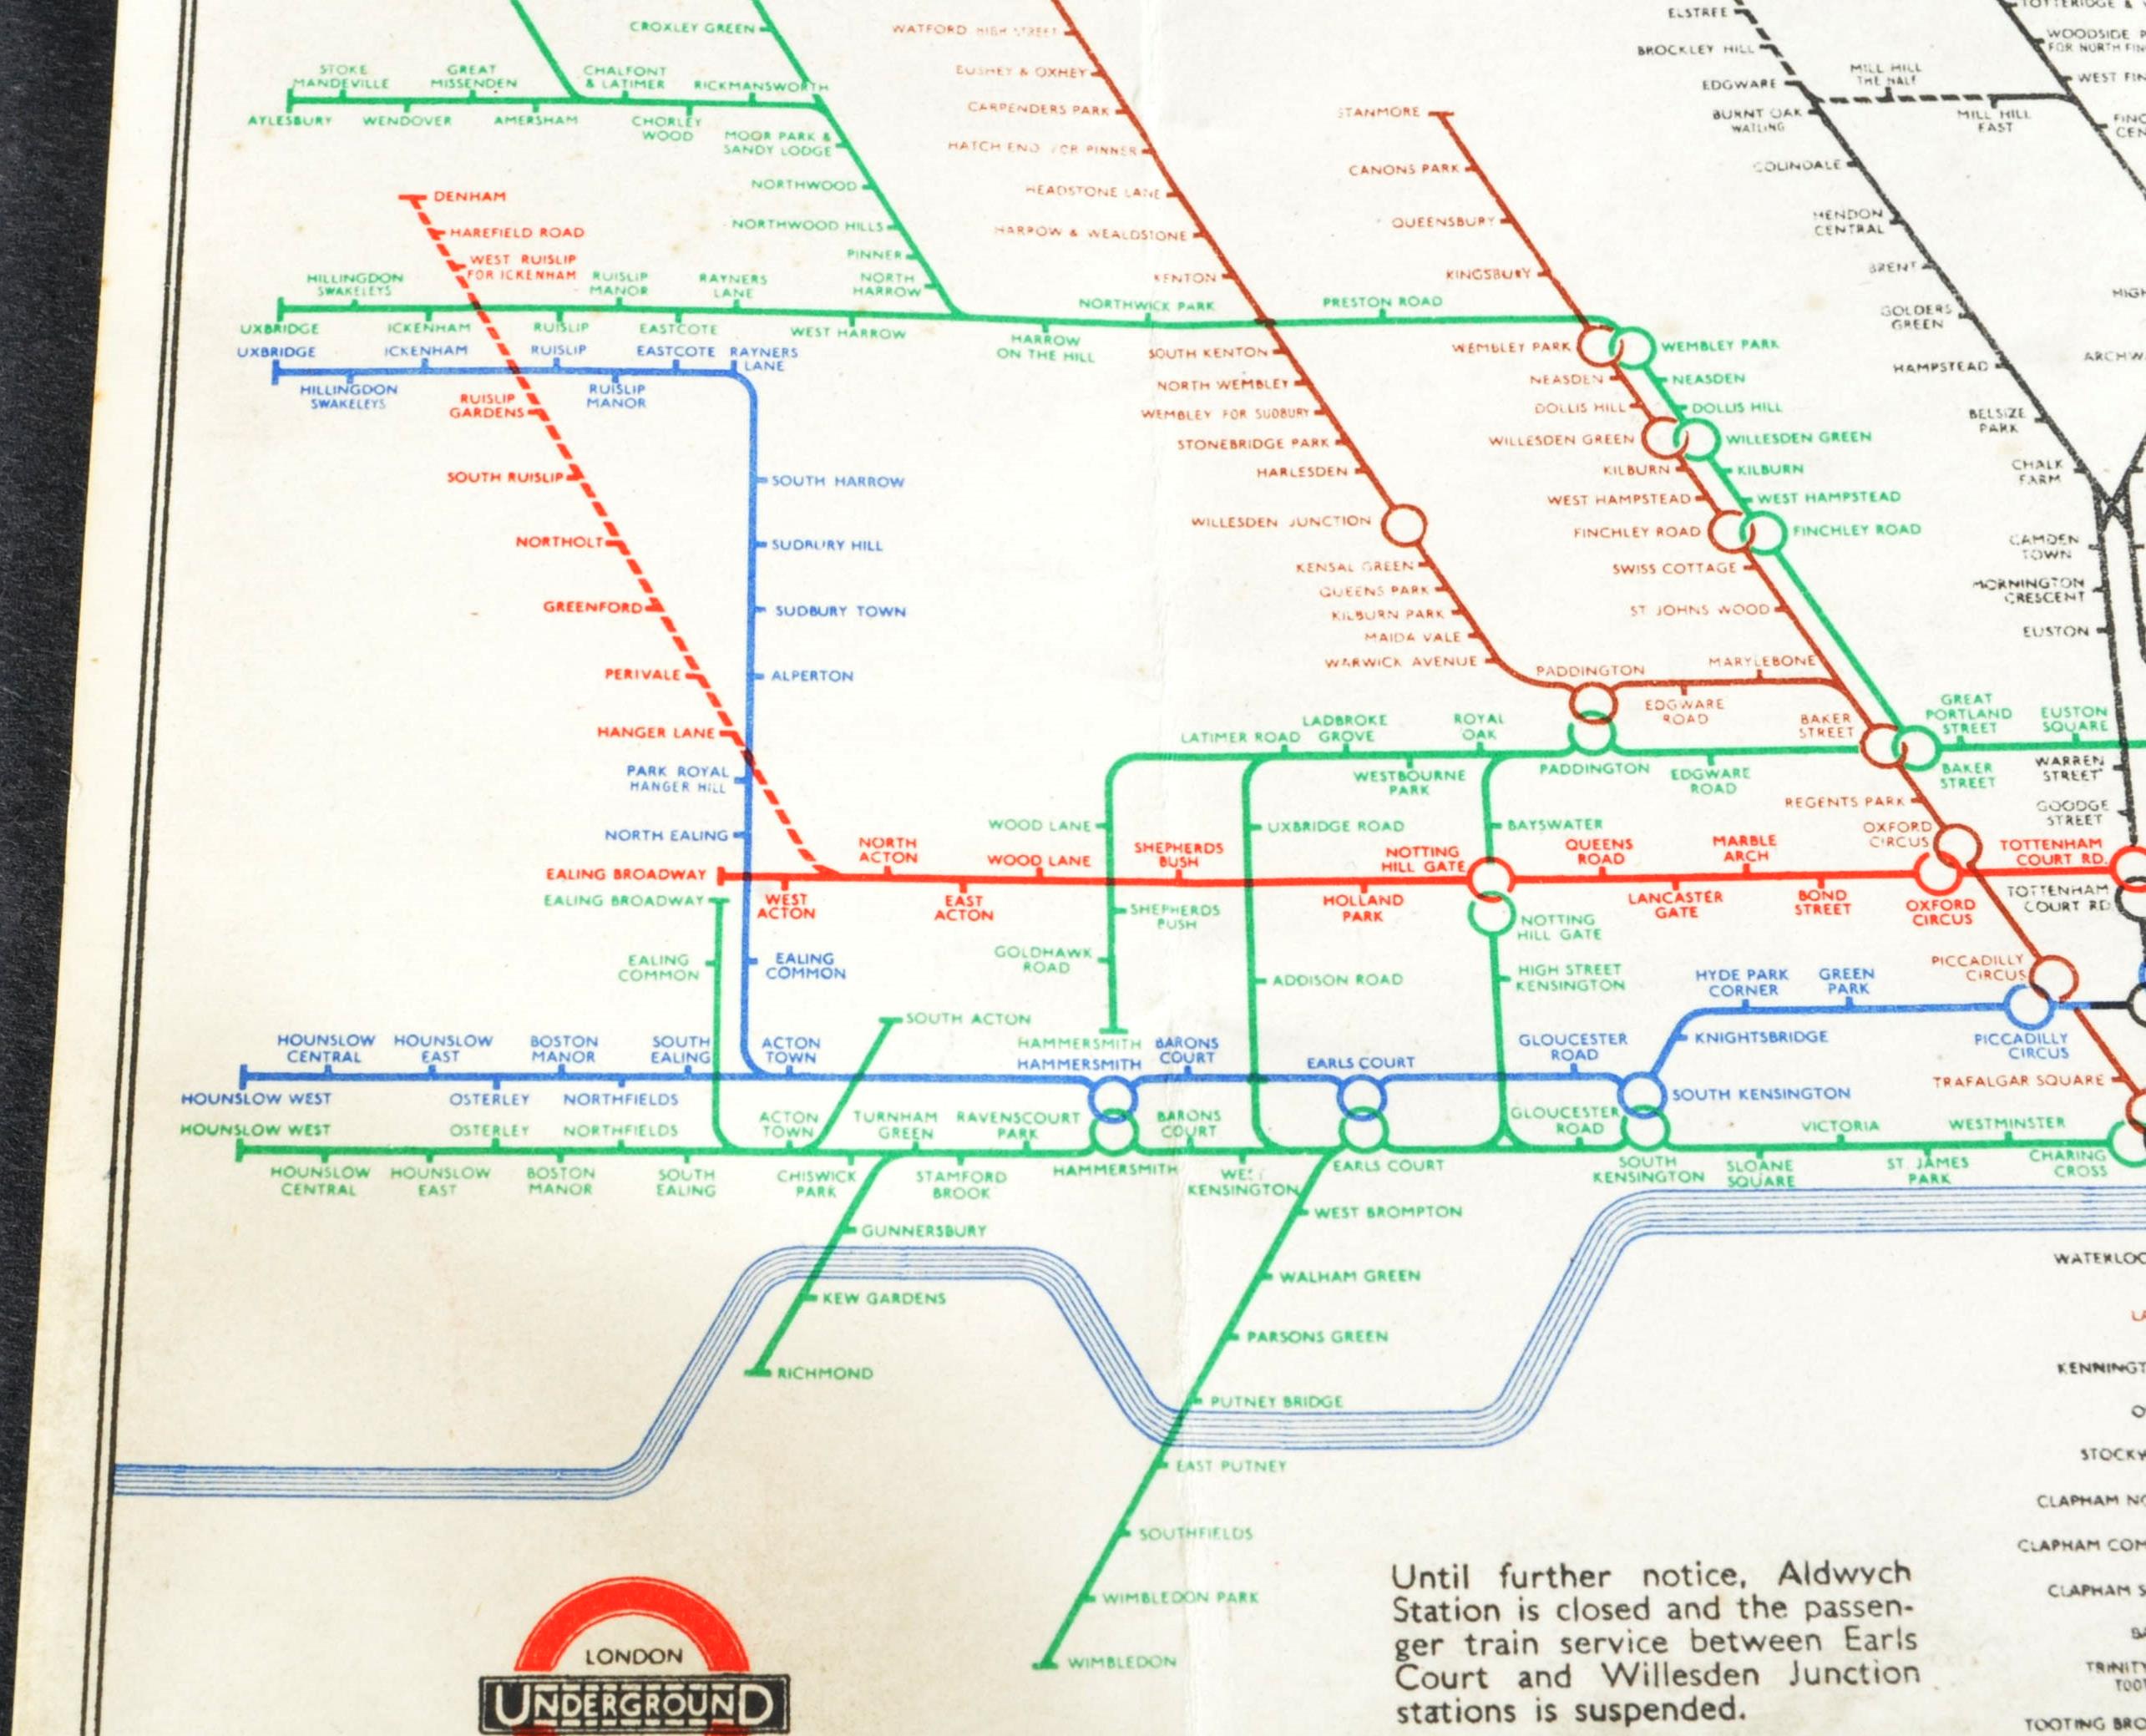 WWII SECOND WORLD WAR 1941 LONDON UNDERGROUND ISSUED SHELTER MAP - Image 2 of 6